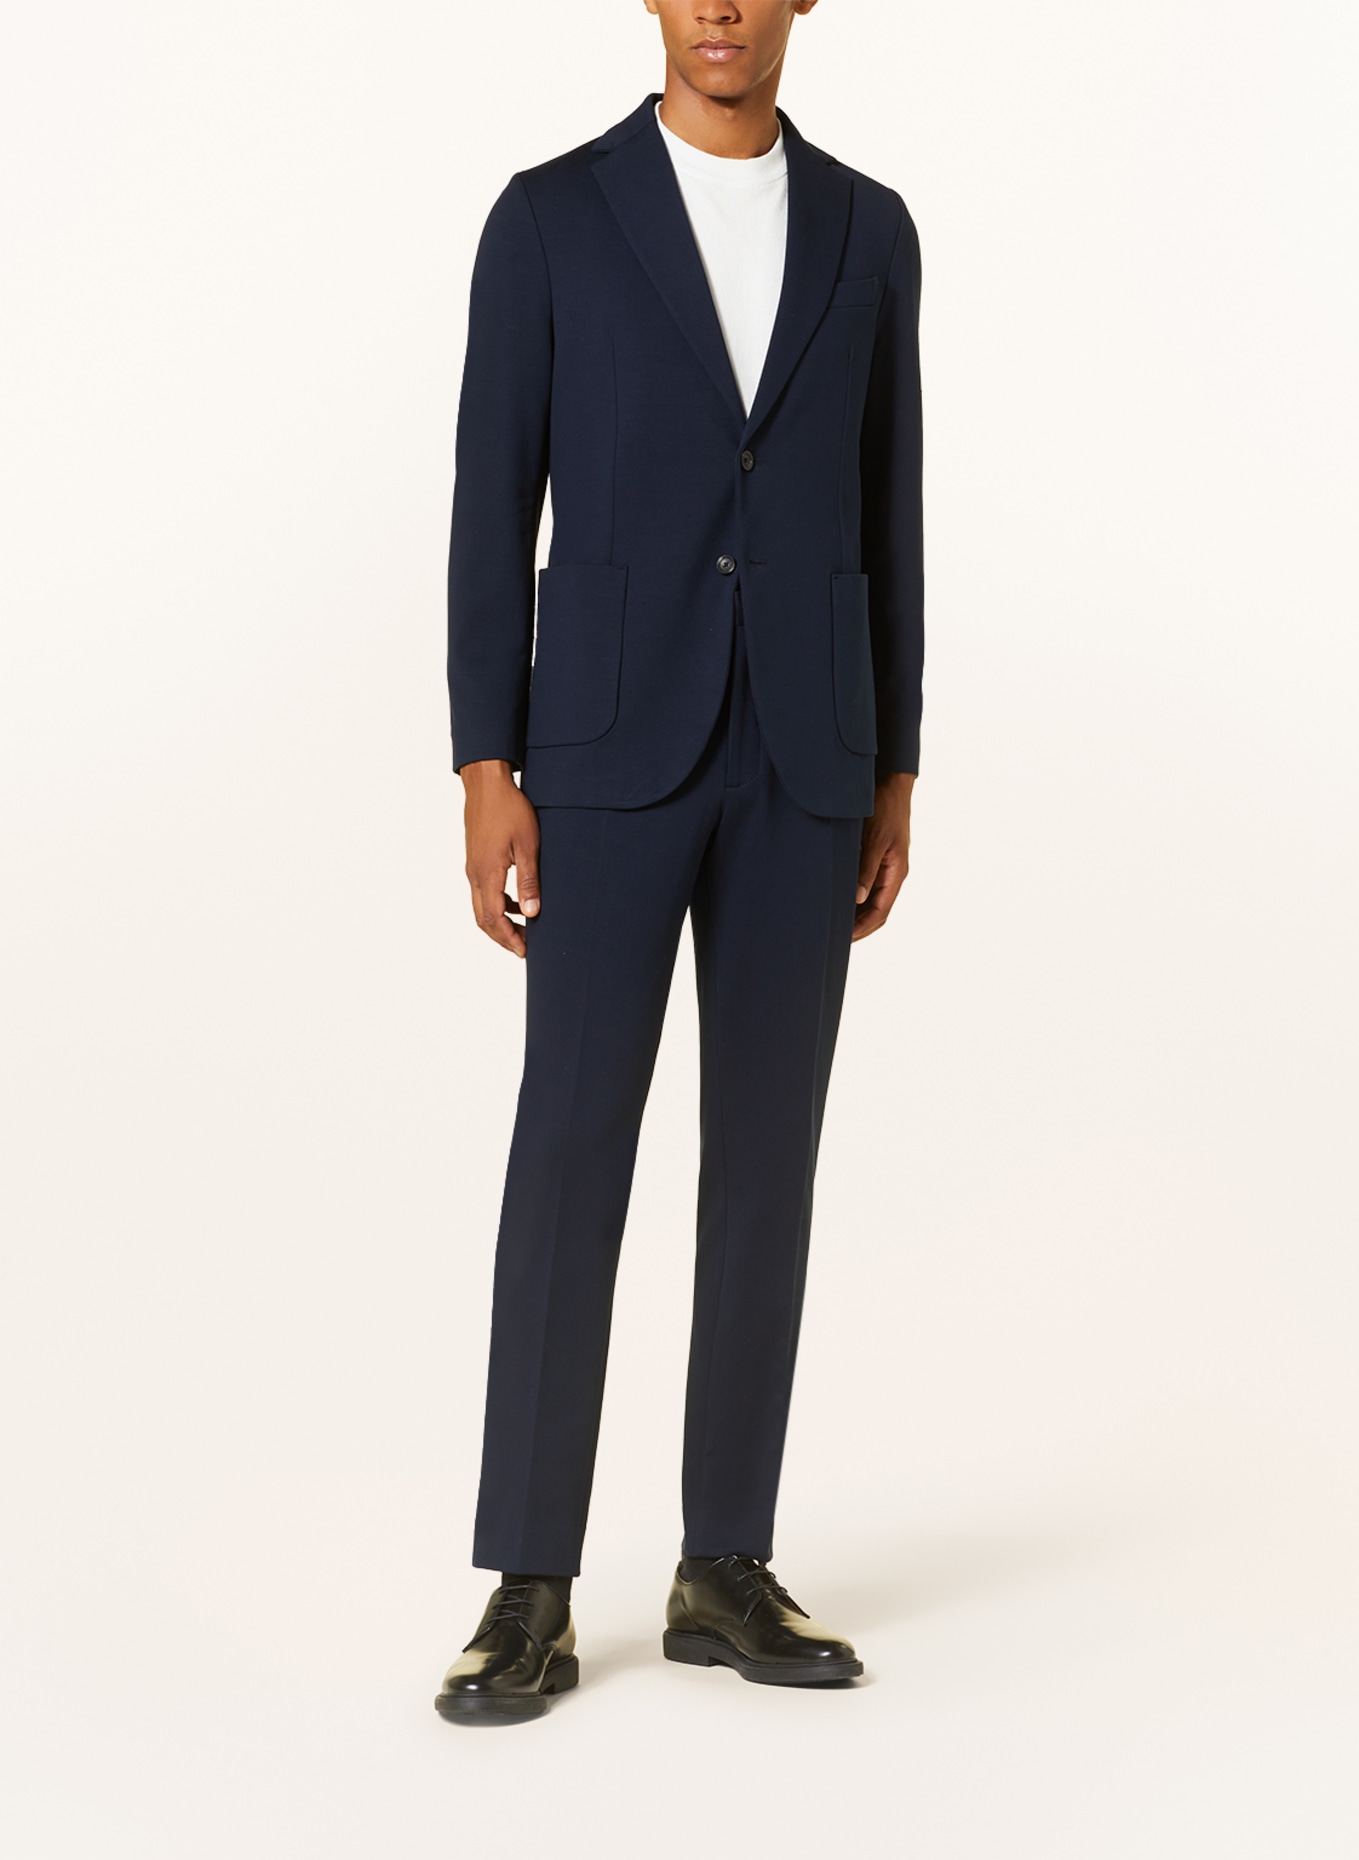 CIRCOLO 1901 Suit jacket extra slim fit made of jersey, Color: 447 Blu Navy (Image 2)